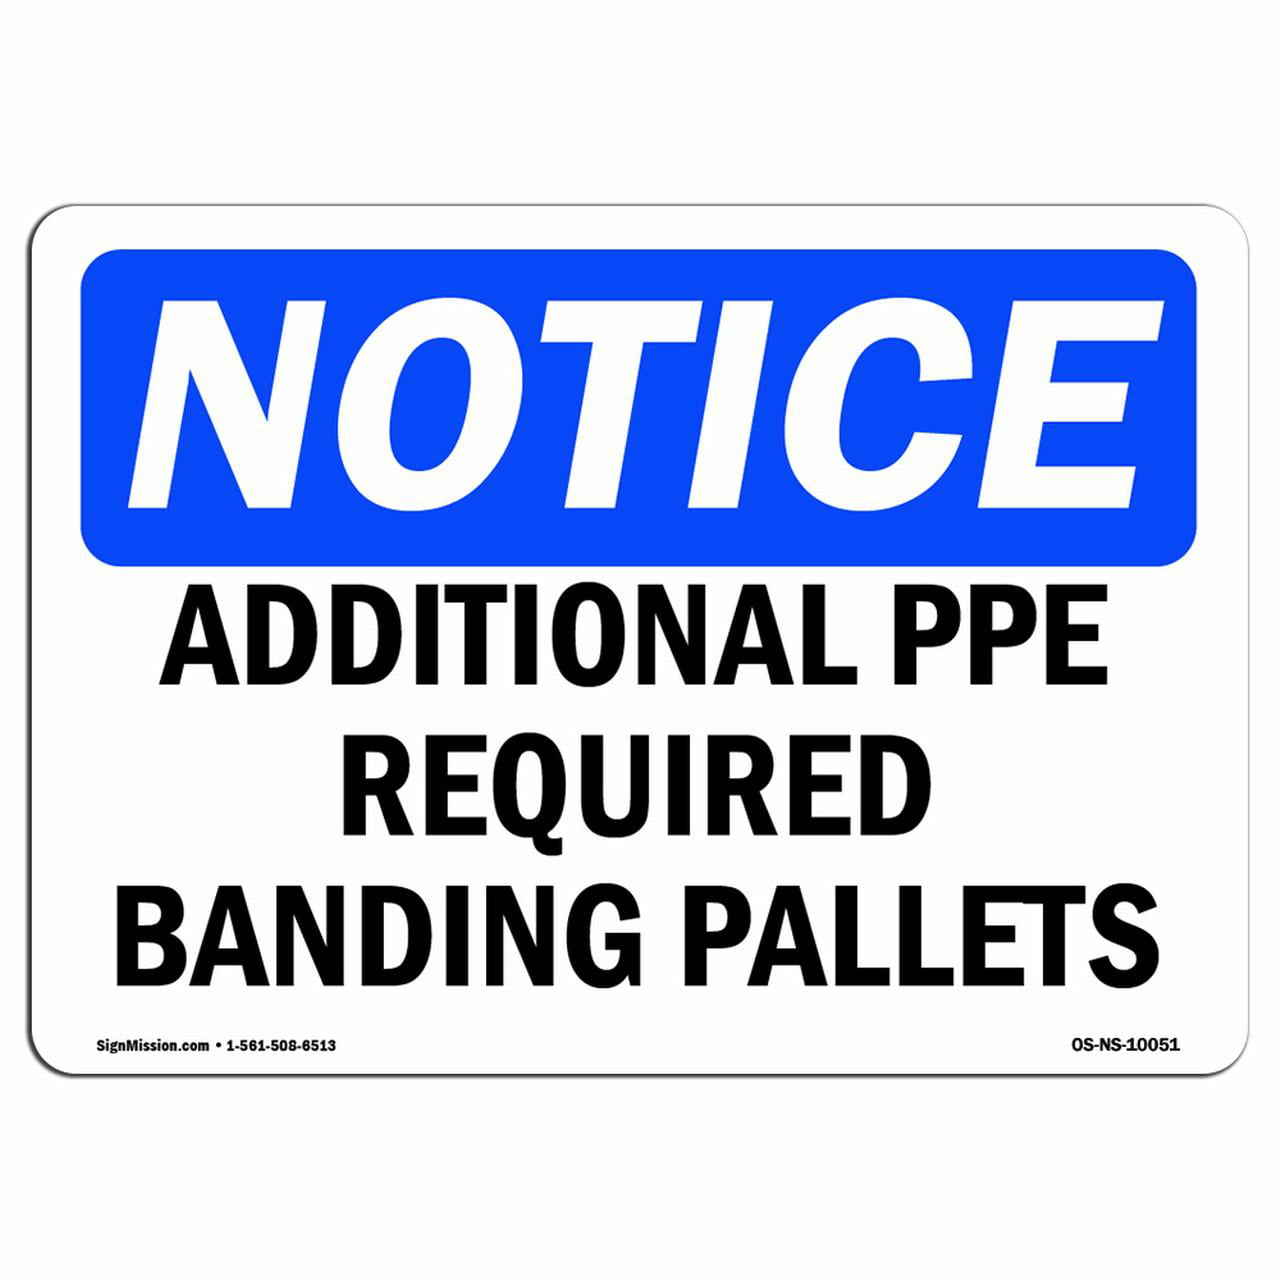 Face Mask Protection Required Exterior PPE Aluminum Sign or Vinyl Sticker